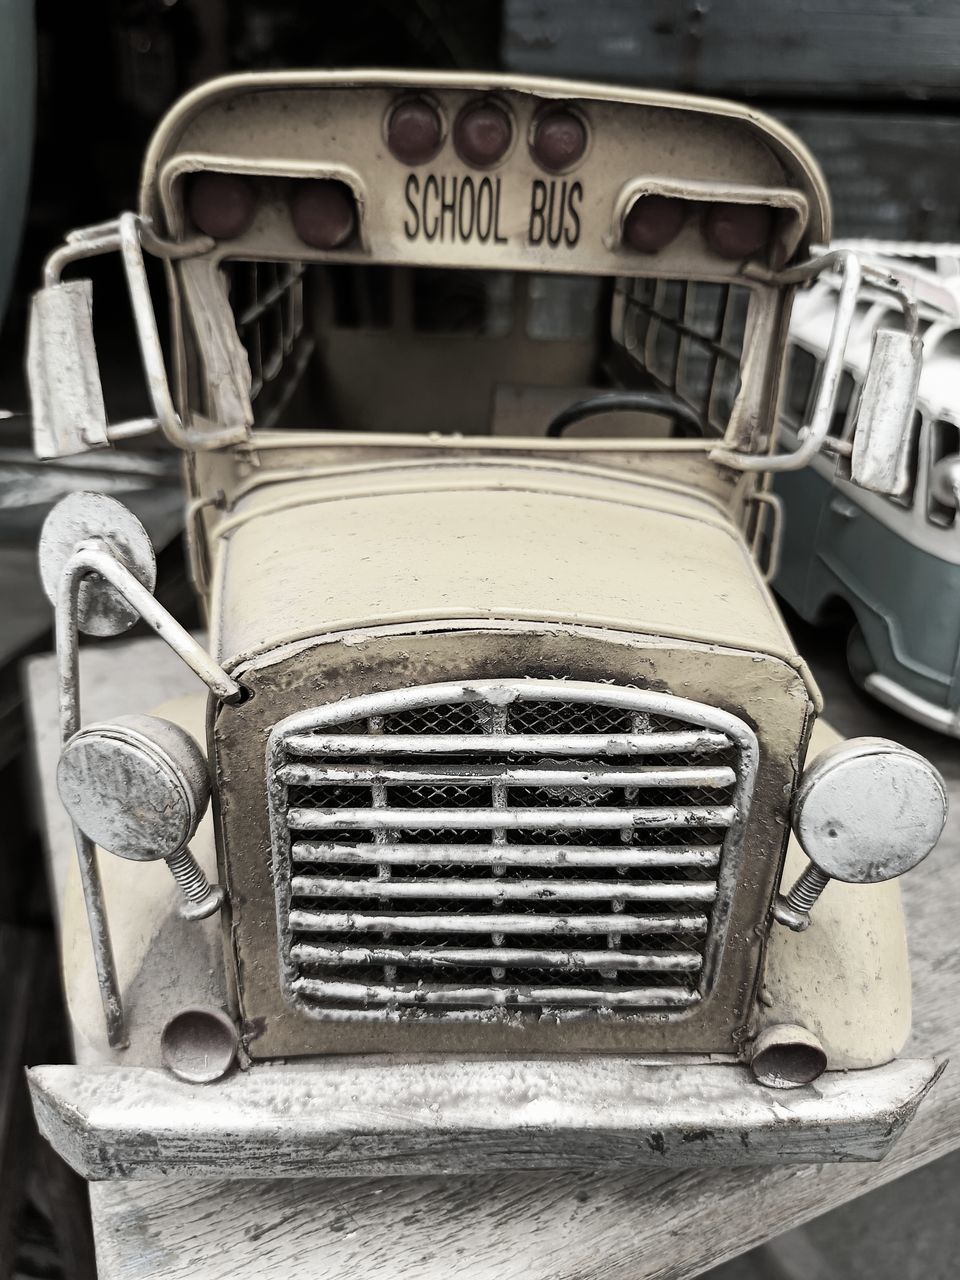 car, vehicle, vintage car, mode of transportation, land vehicle, retro styled, transportation, motor vehicle, no people, metal, old, automotive exterior, day, iron, close-up